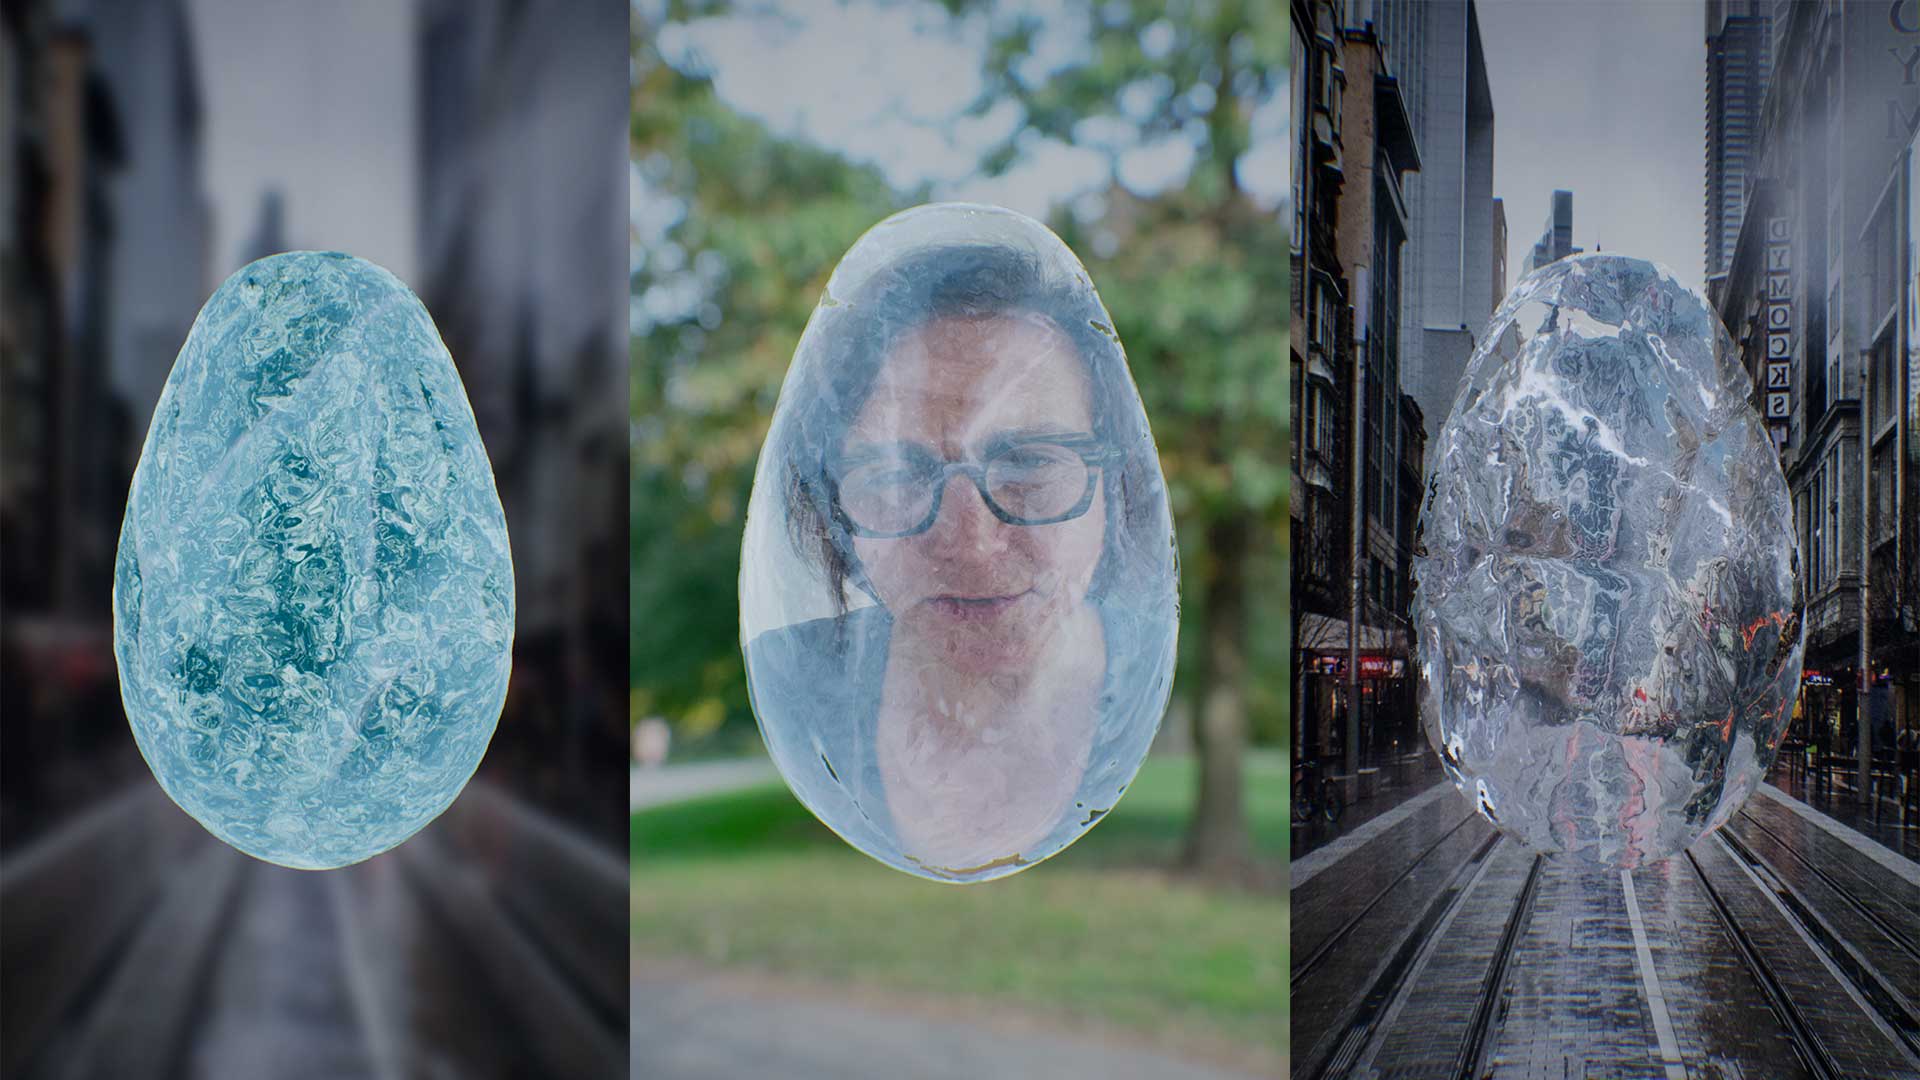 A triptych of icy raindrops on different outside background. In the middle raindrops is a person's face.